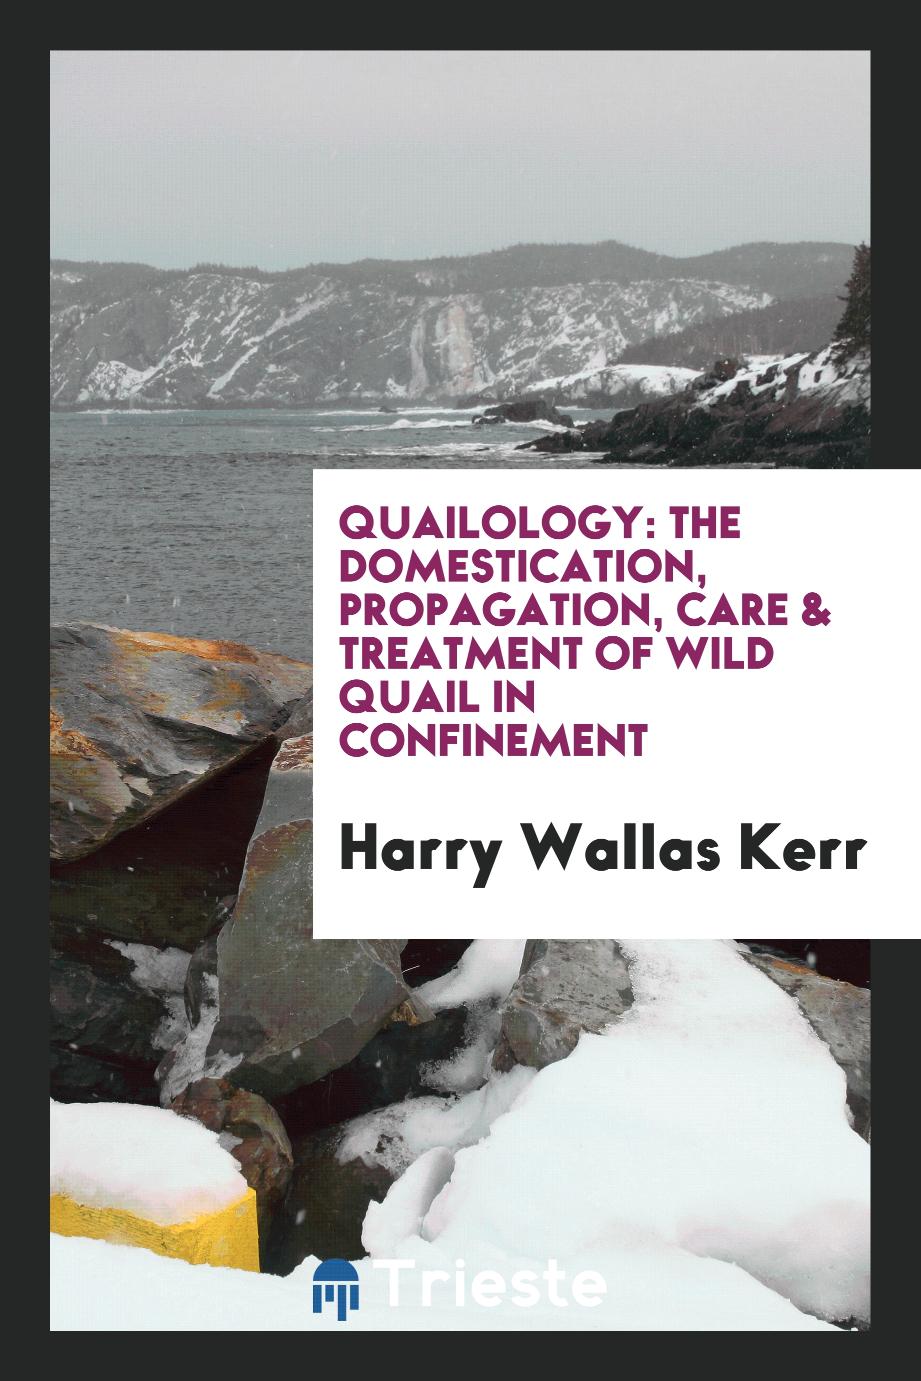 Quailology: The Domestication, Propagation, Care & Treatment of Wild Quail in Confinement